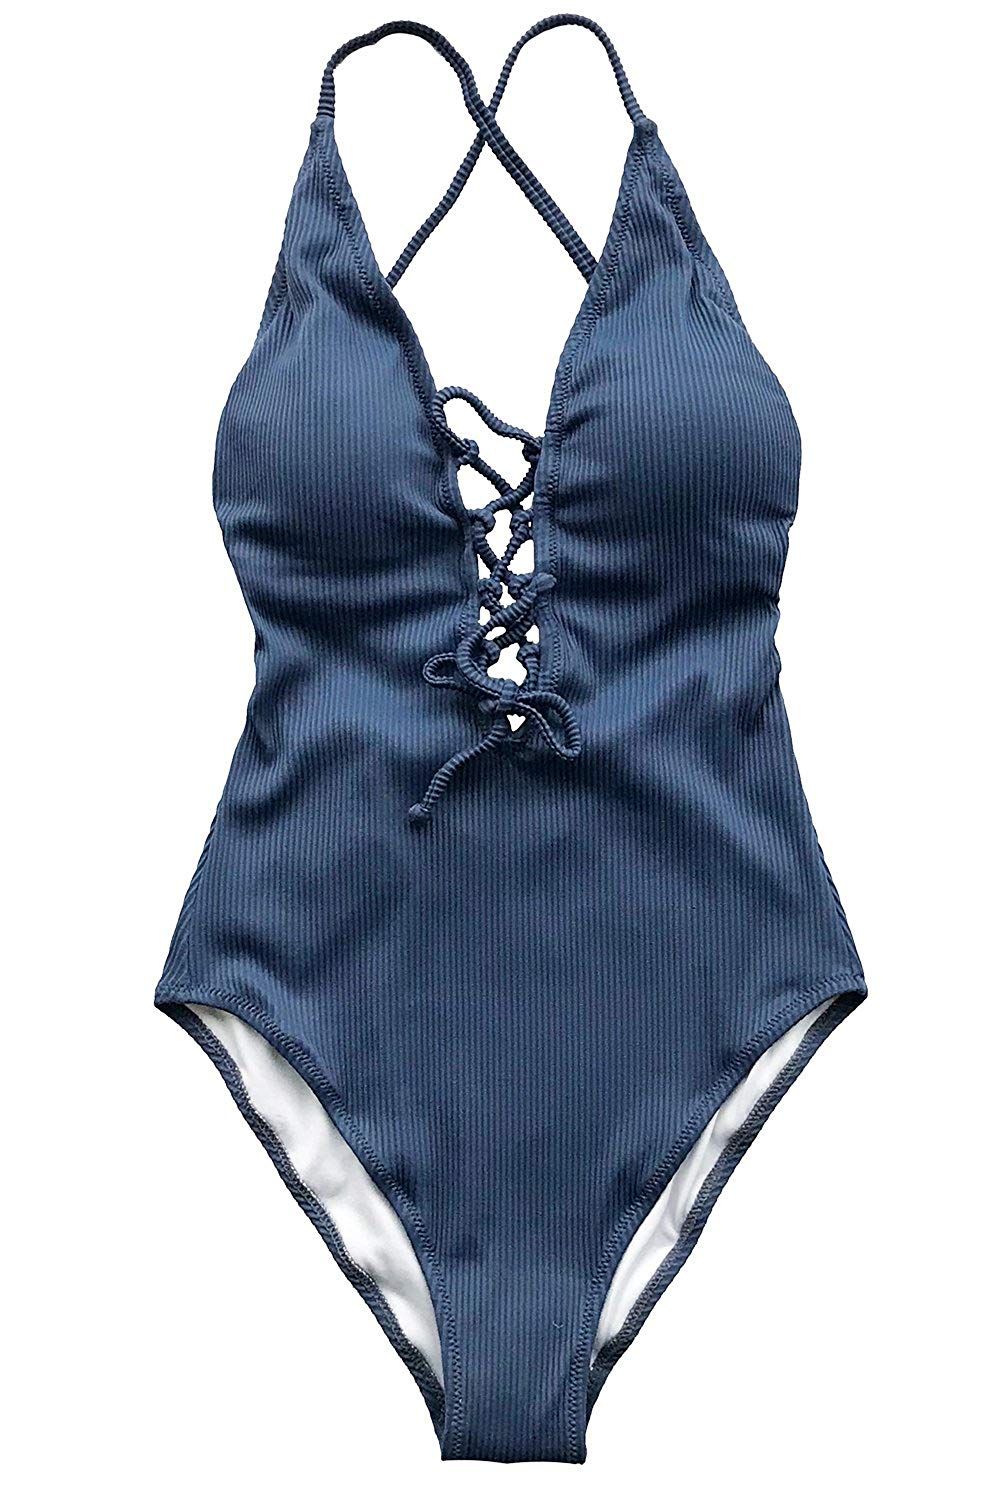 CUPSHE Women's Remind Me Solid One-Piece Swimsuit Bathing Suit, Blue ...